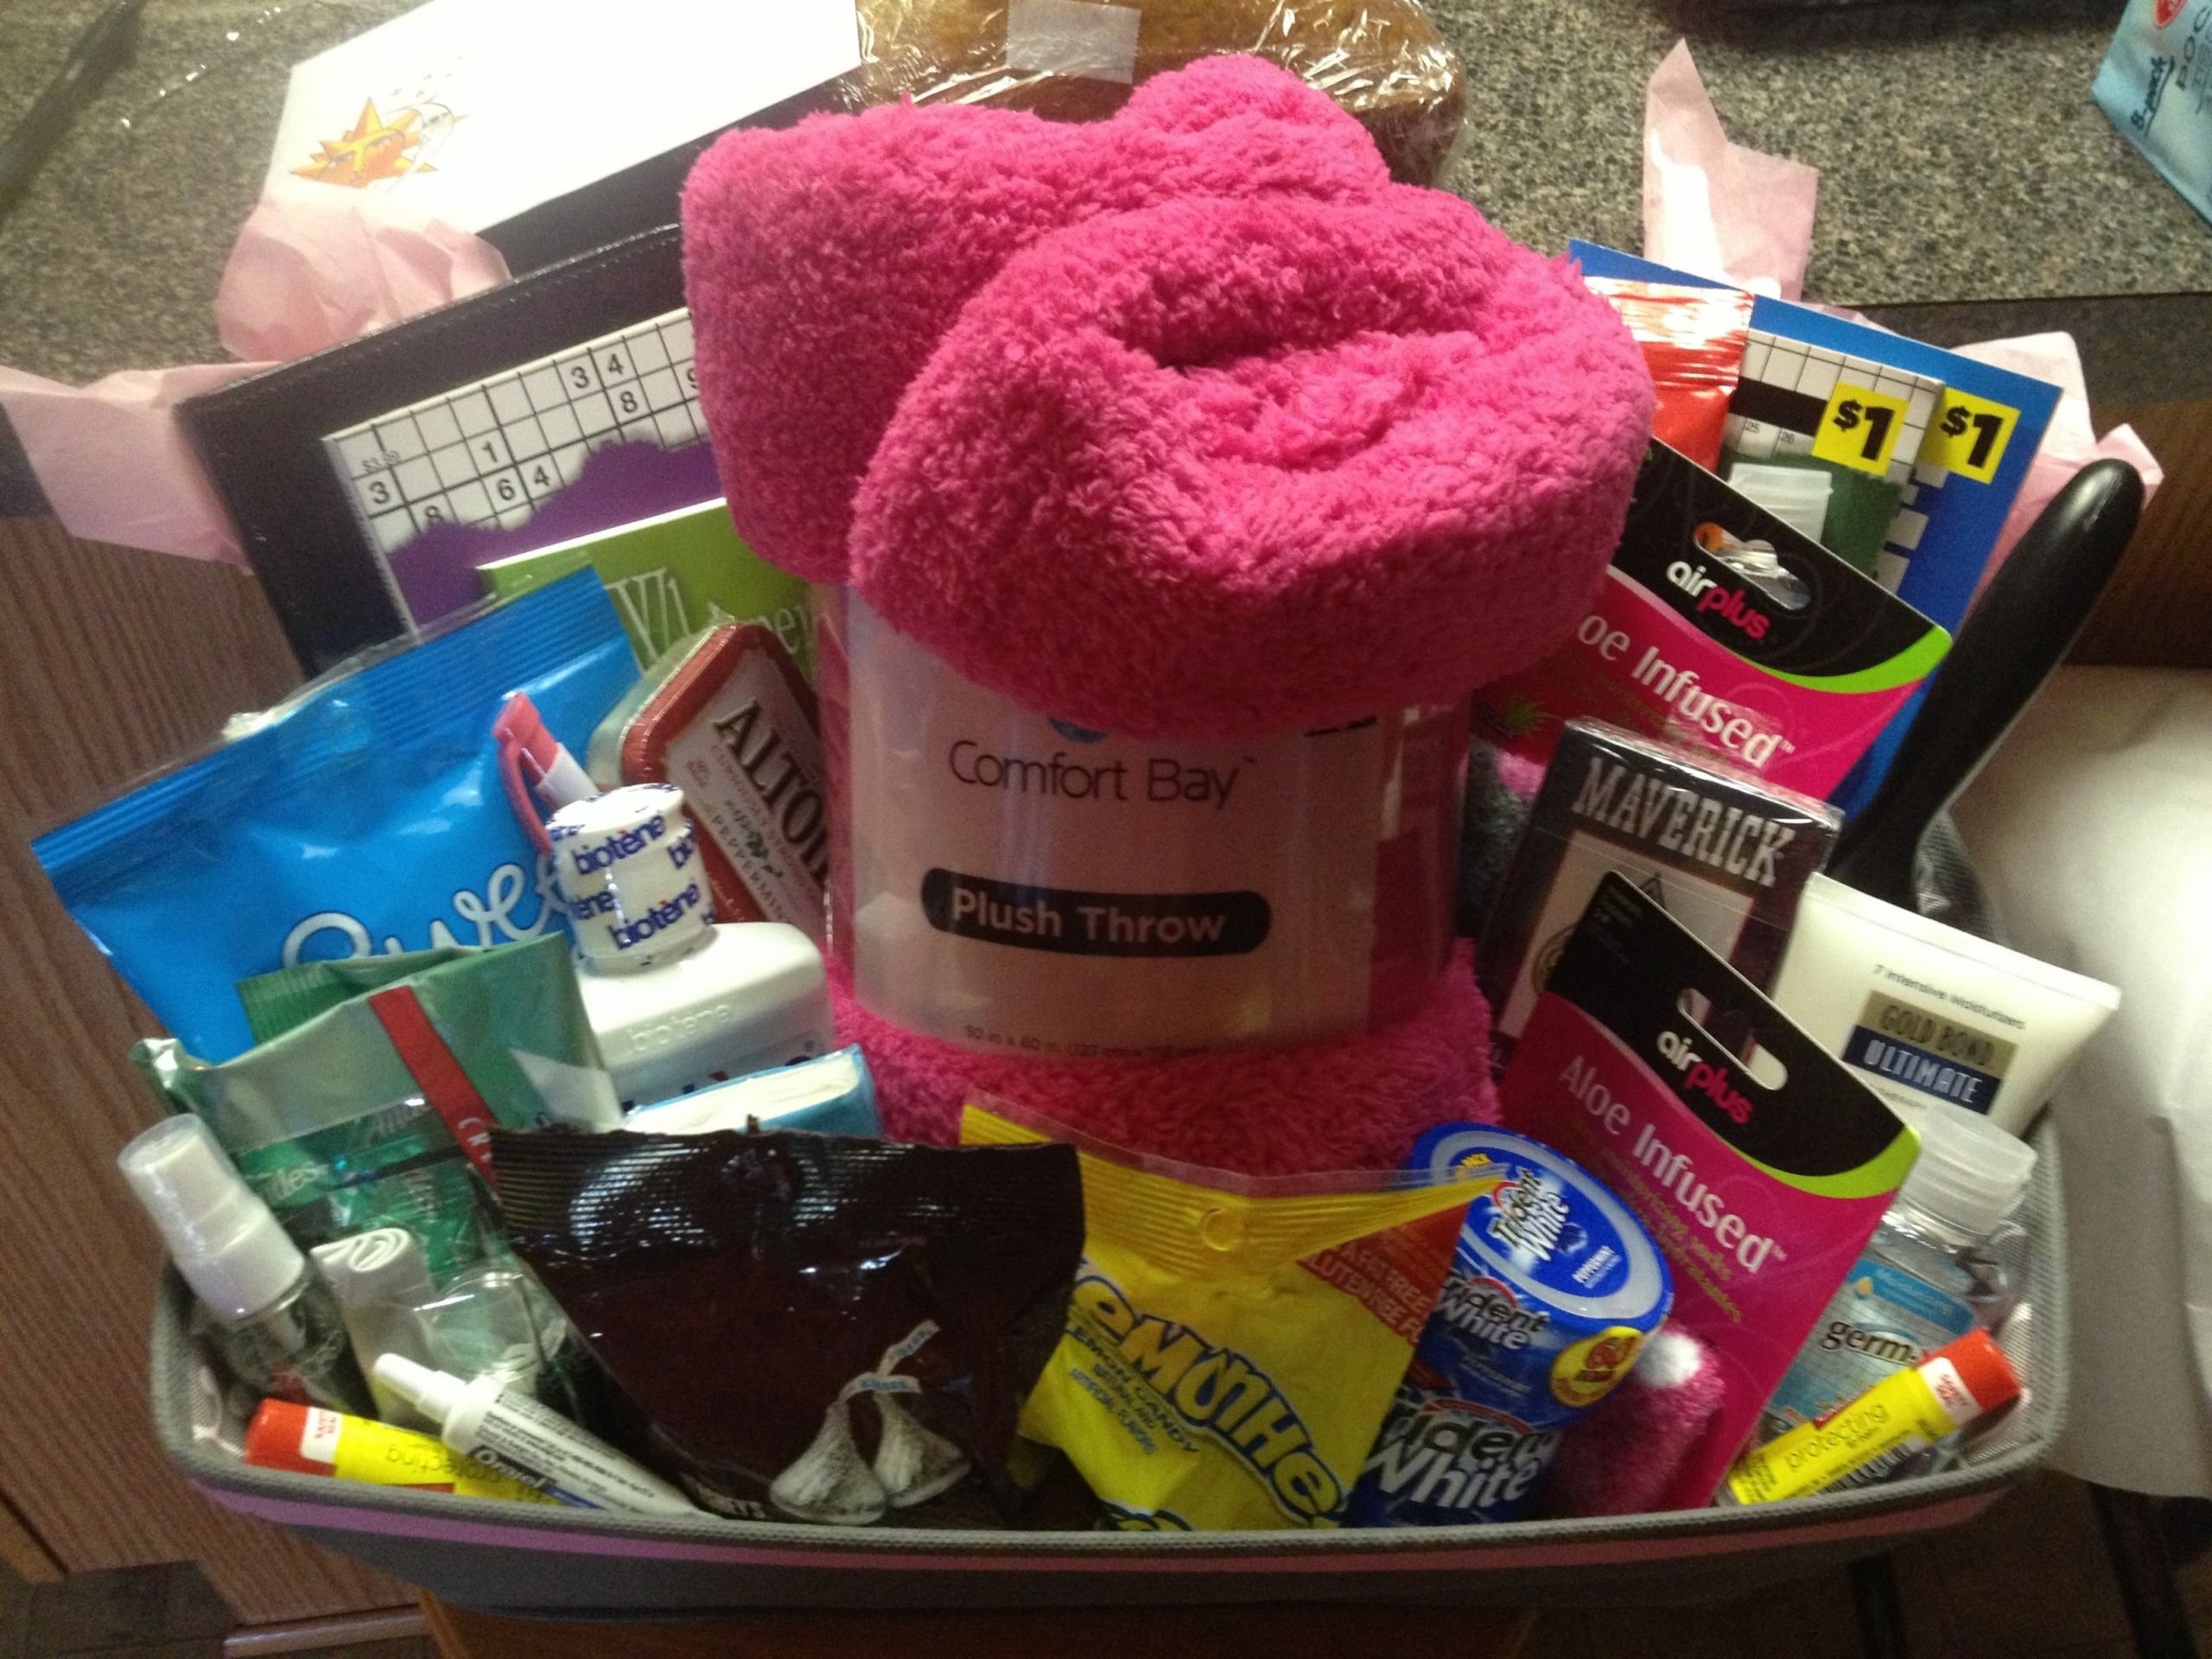 Gift Basket Ideas For Breast Cancer Patient
 10 Great Gift Ideas For Cancer Patients 2019